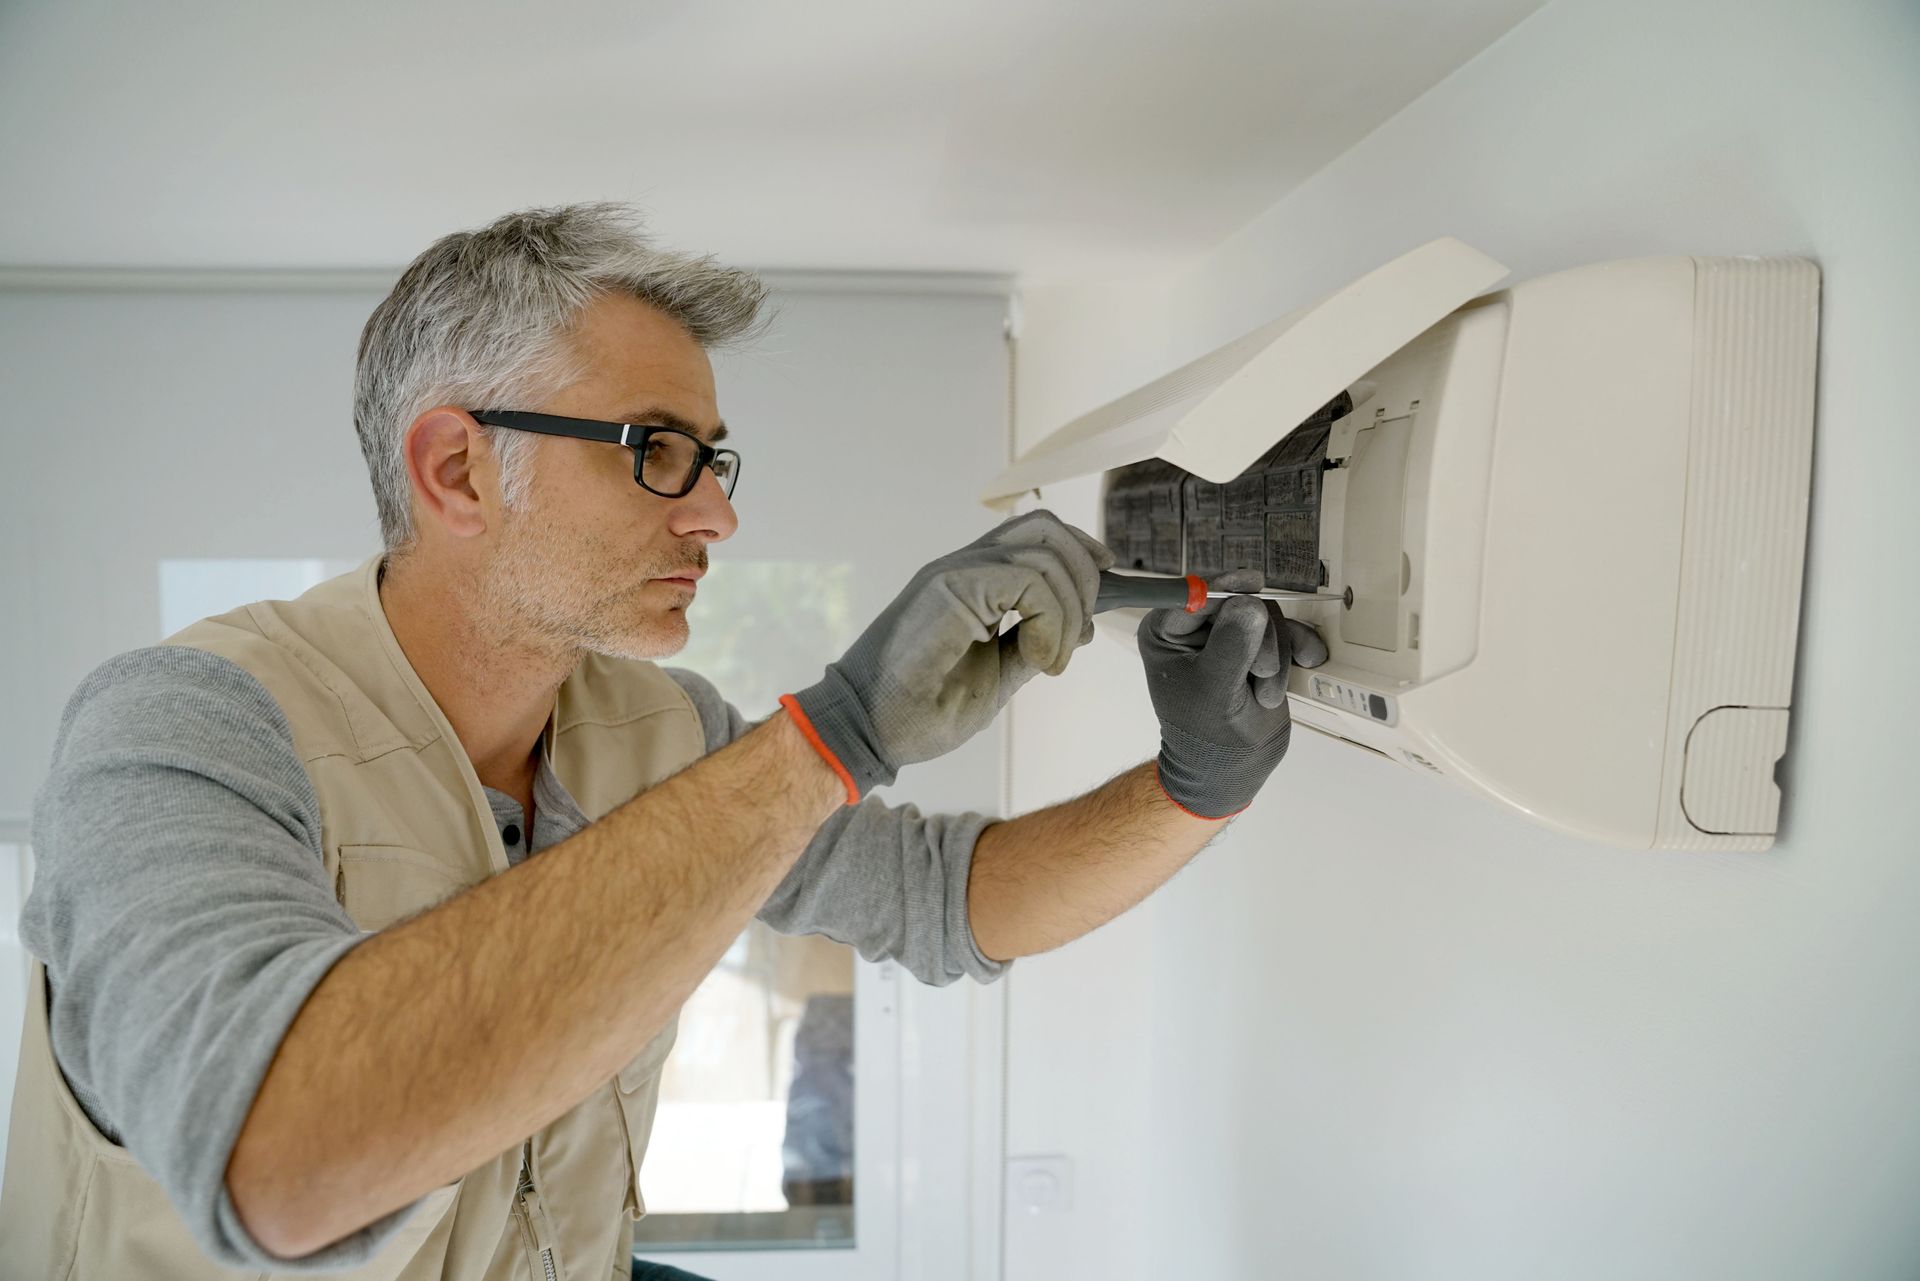 An experienced repairman diligently working on fixing an air conditioner unit, focused on diagnosing and repairing the internal components to restore optimal cooling functionality